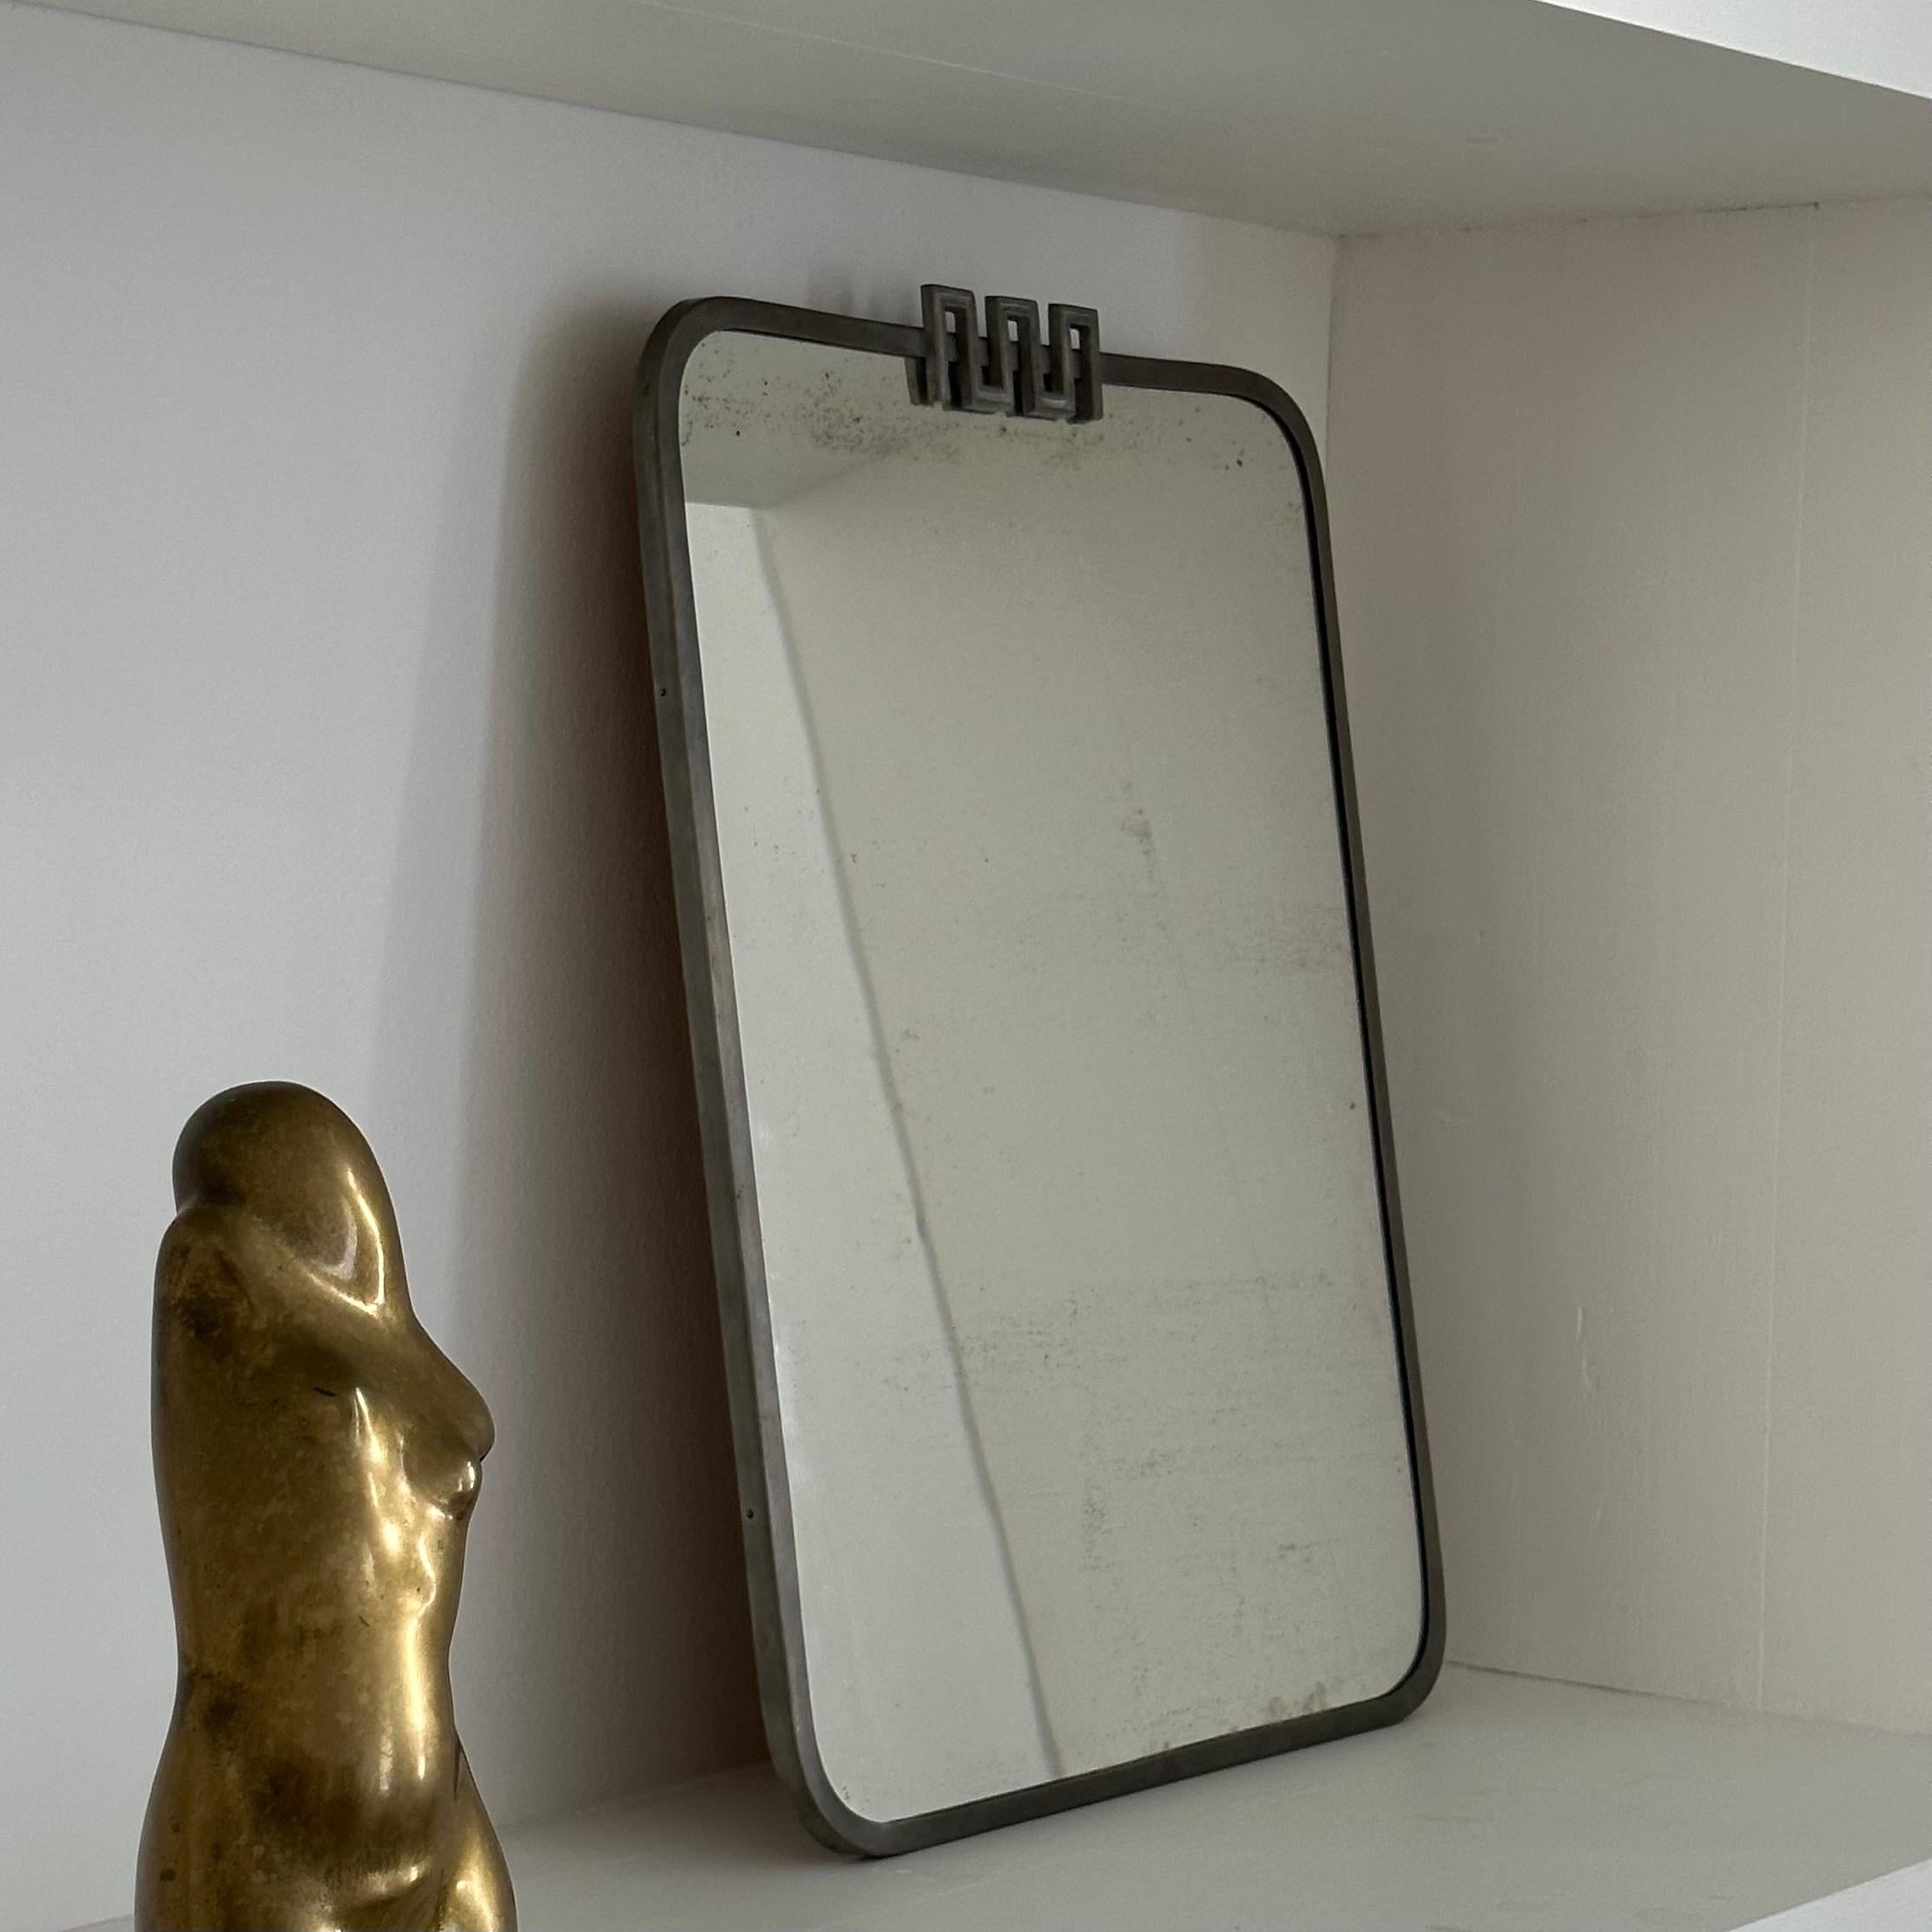 Mid-20th Century Pewter Mirror designed by Nils Fougstedt and made by FAK, 1933, Sweden